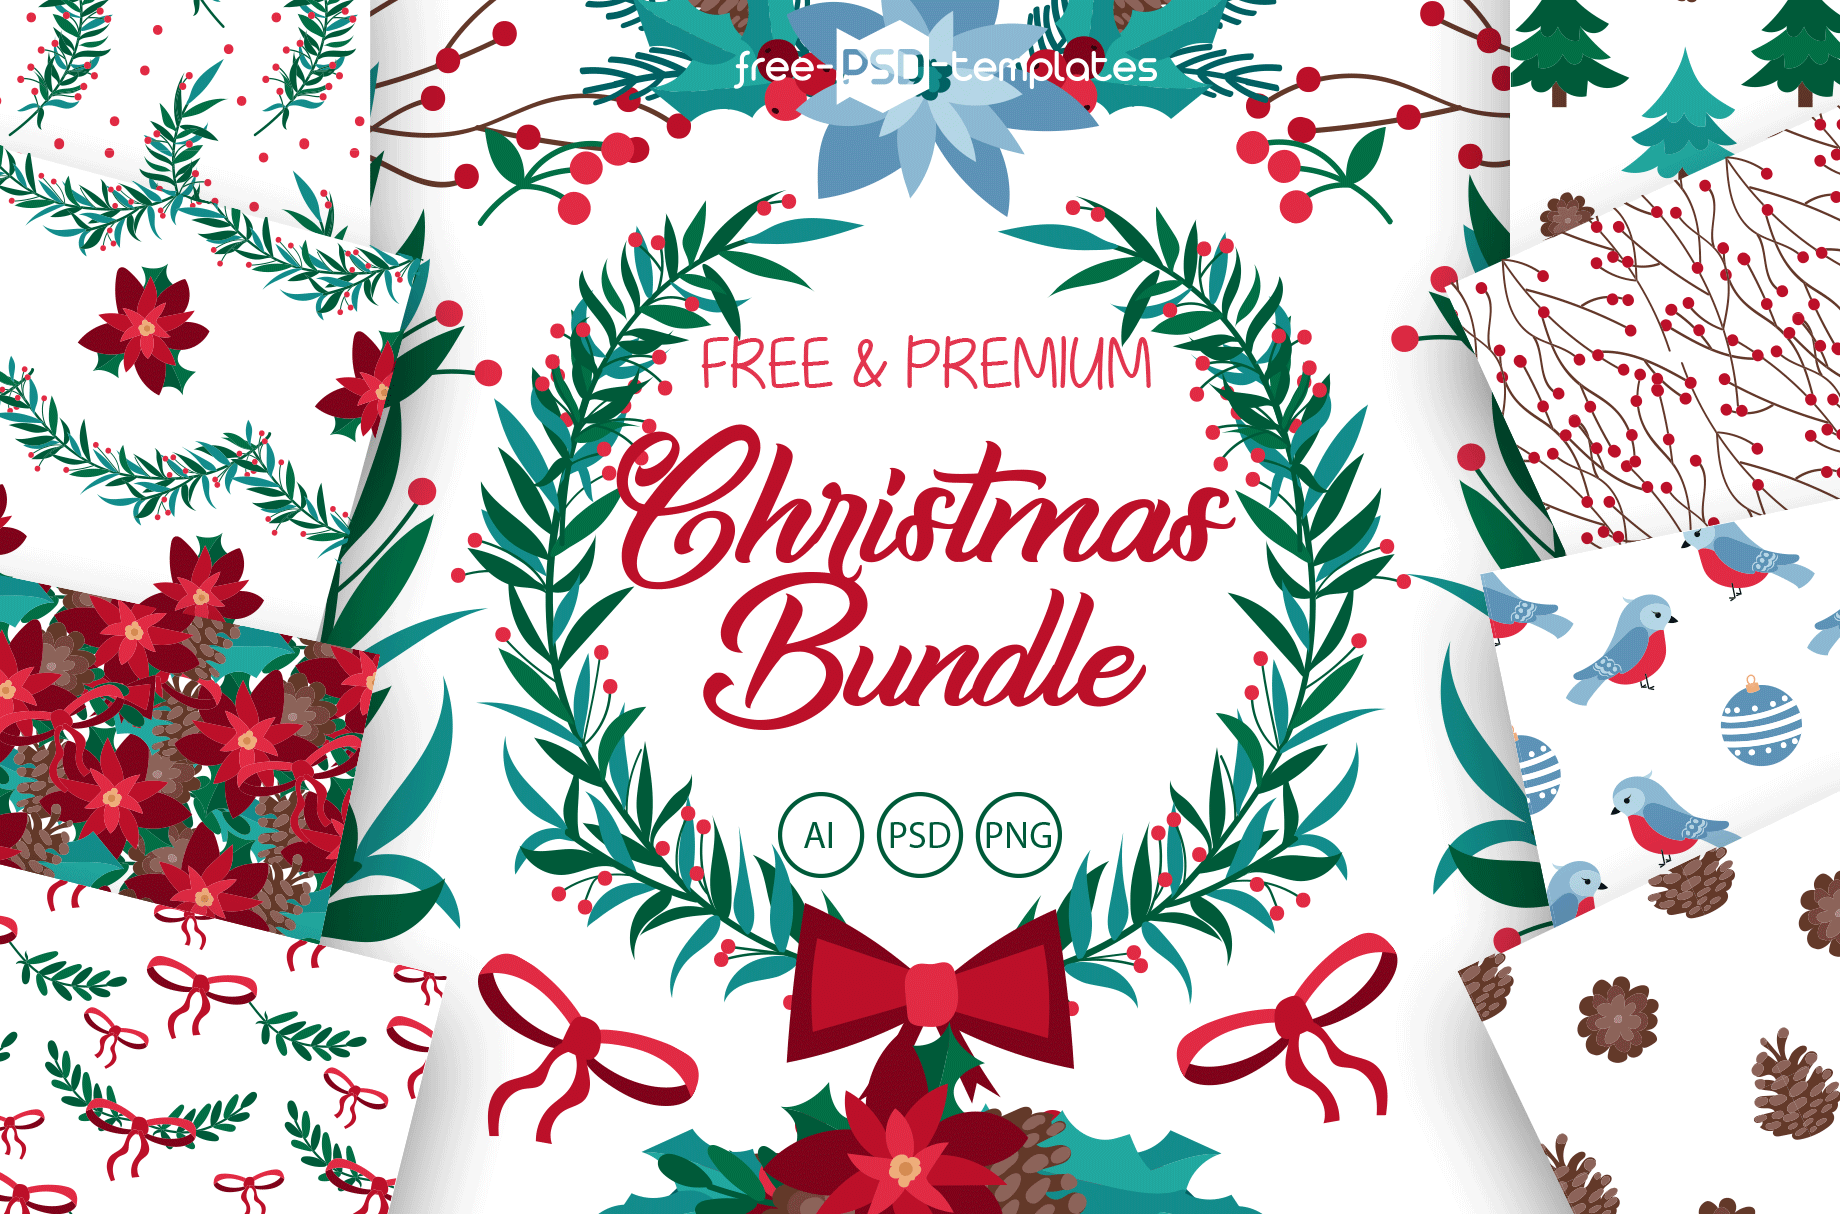 https://free-psd-templates.com/wp-content/uploads/2018/10/free_small_pv_christmas_vector_bundle.png